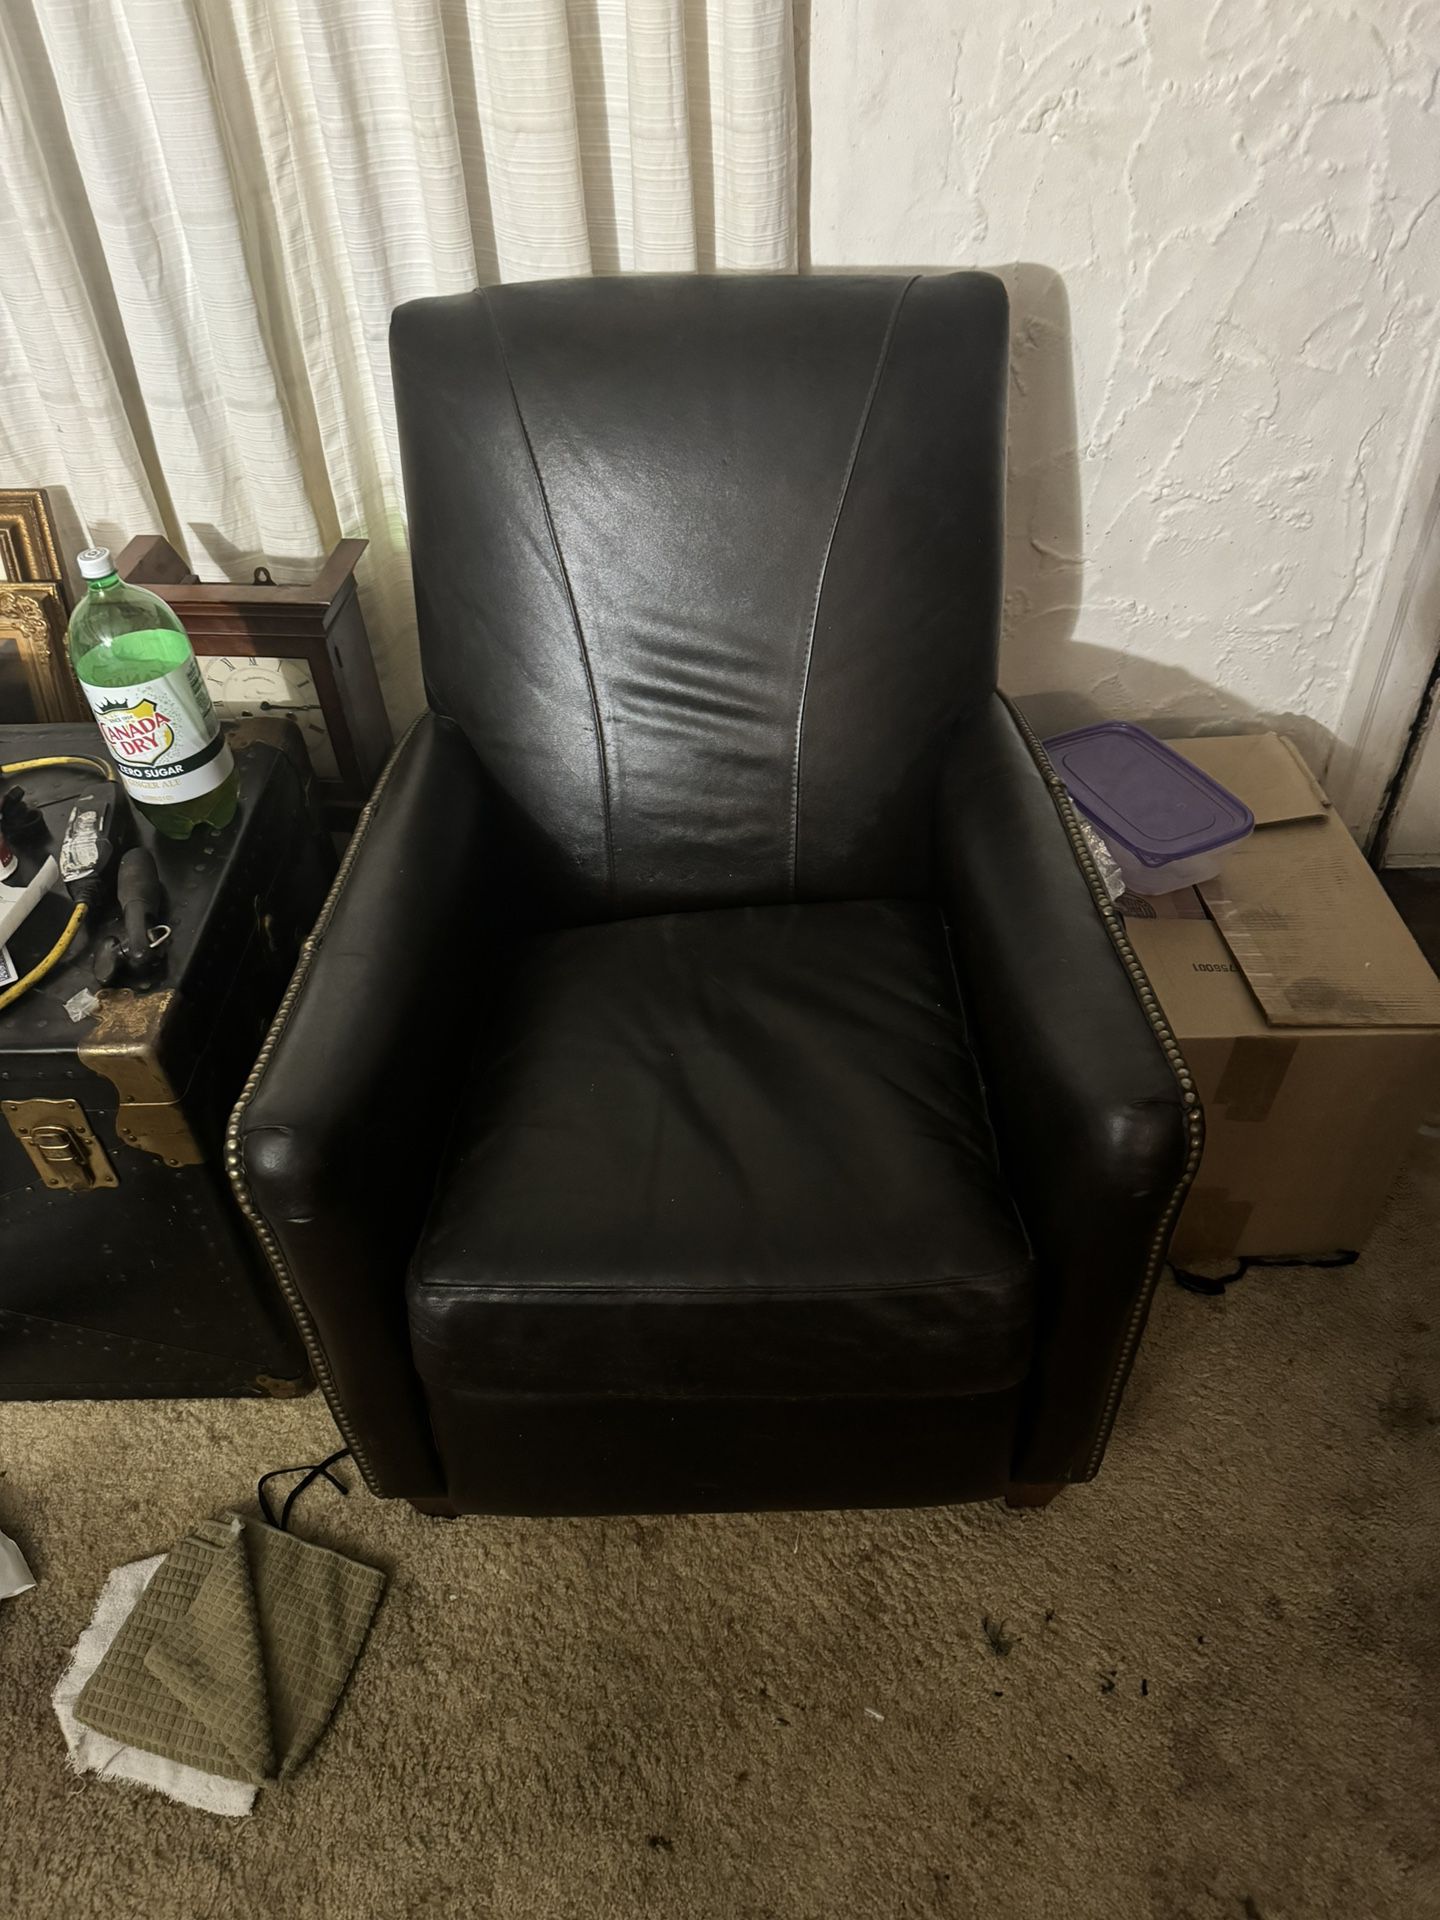 2 Chairs And Couch 